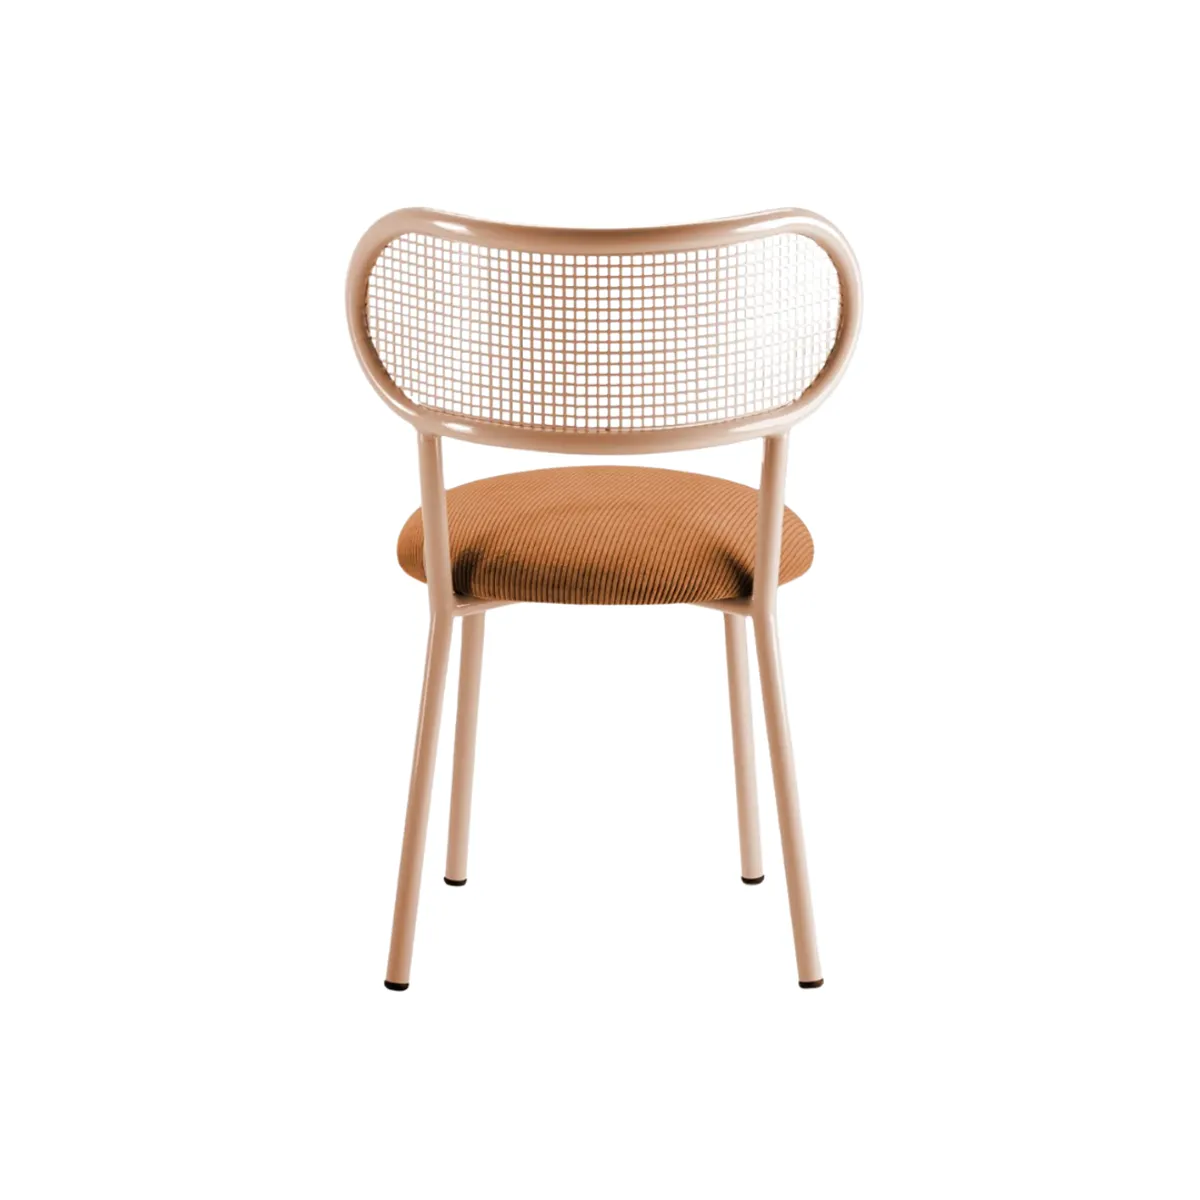 Emory side chair 6